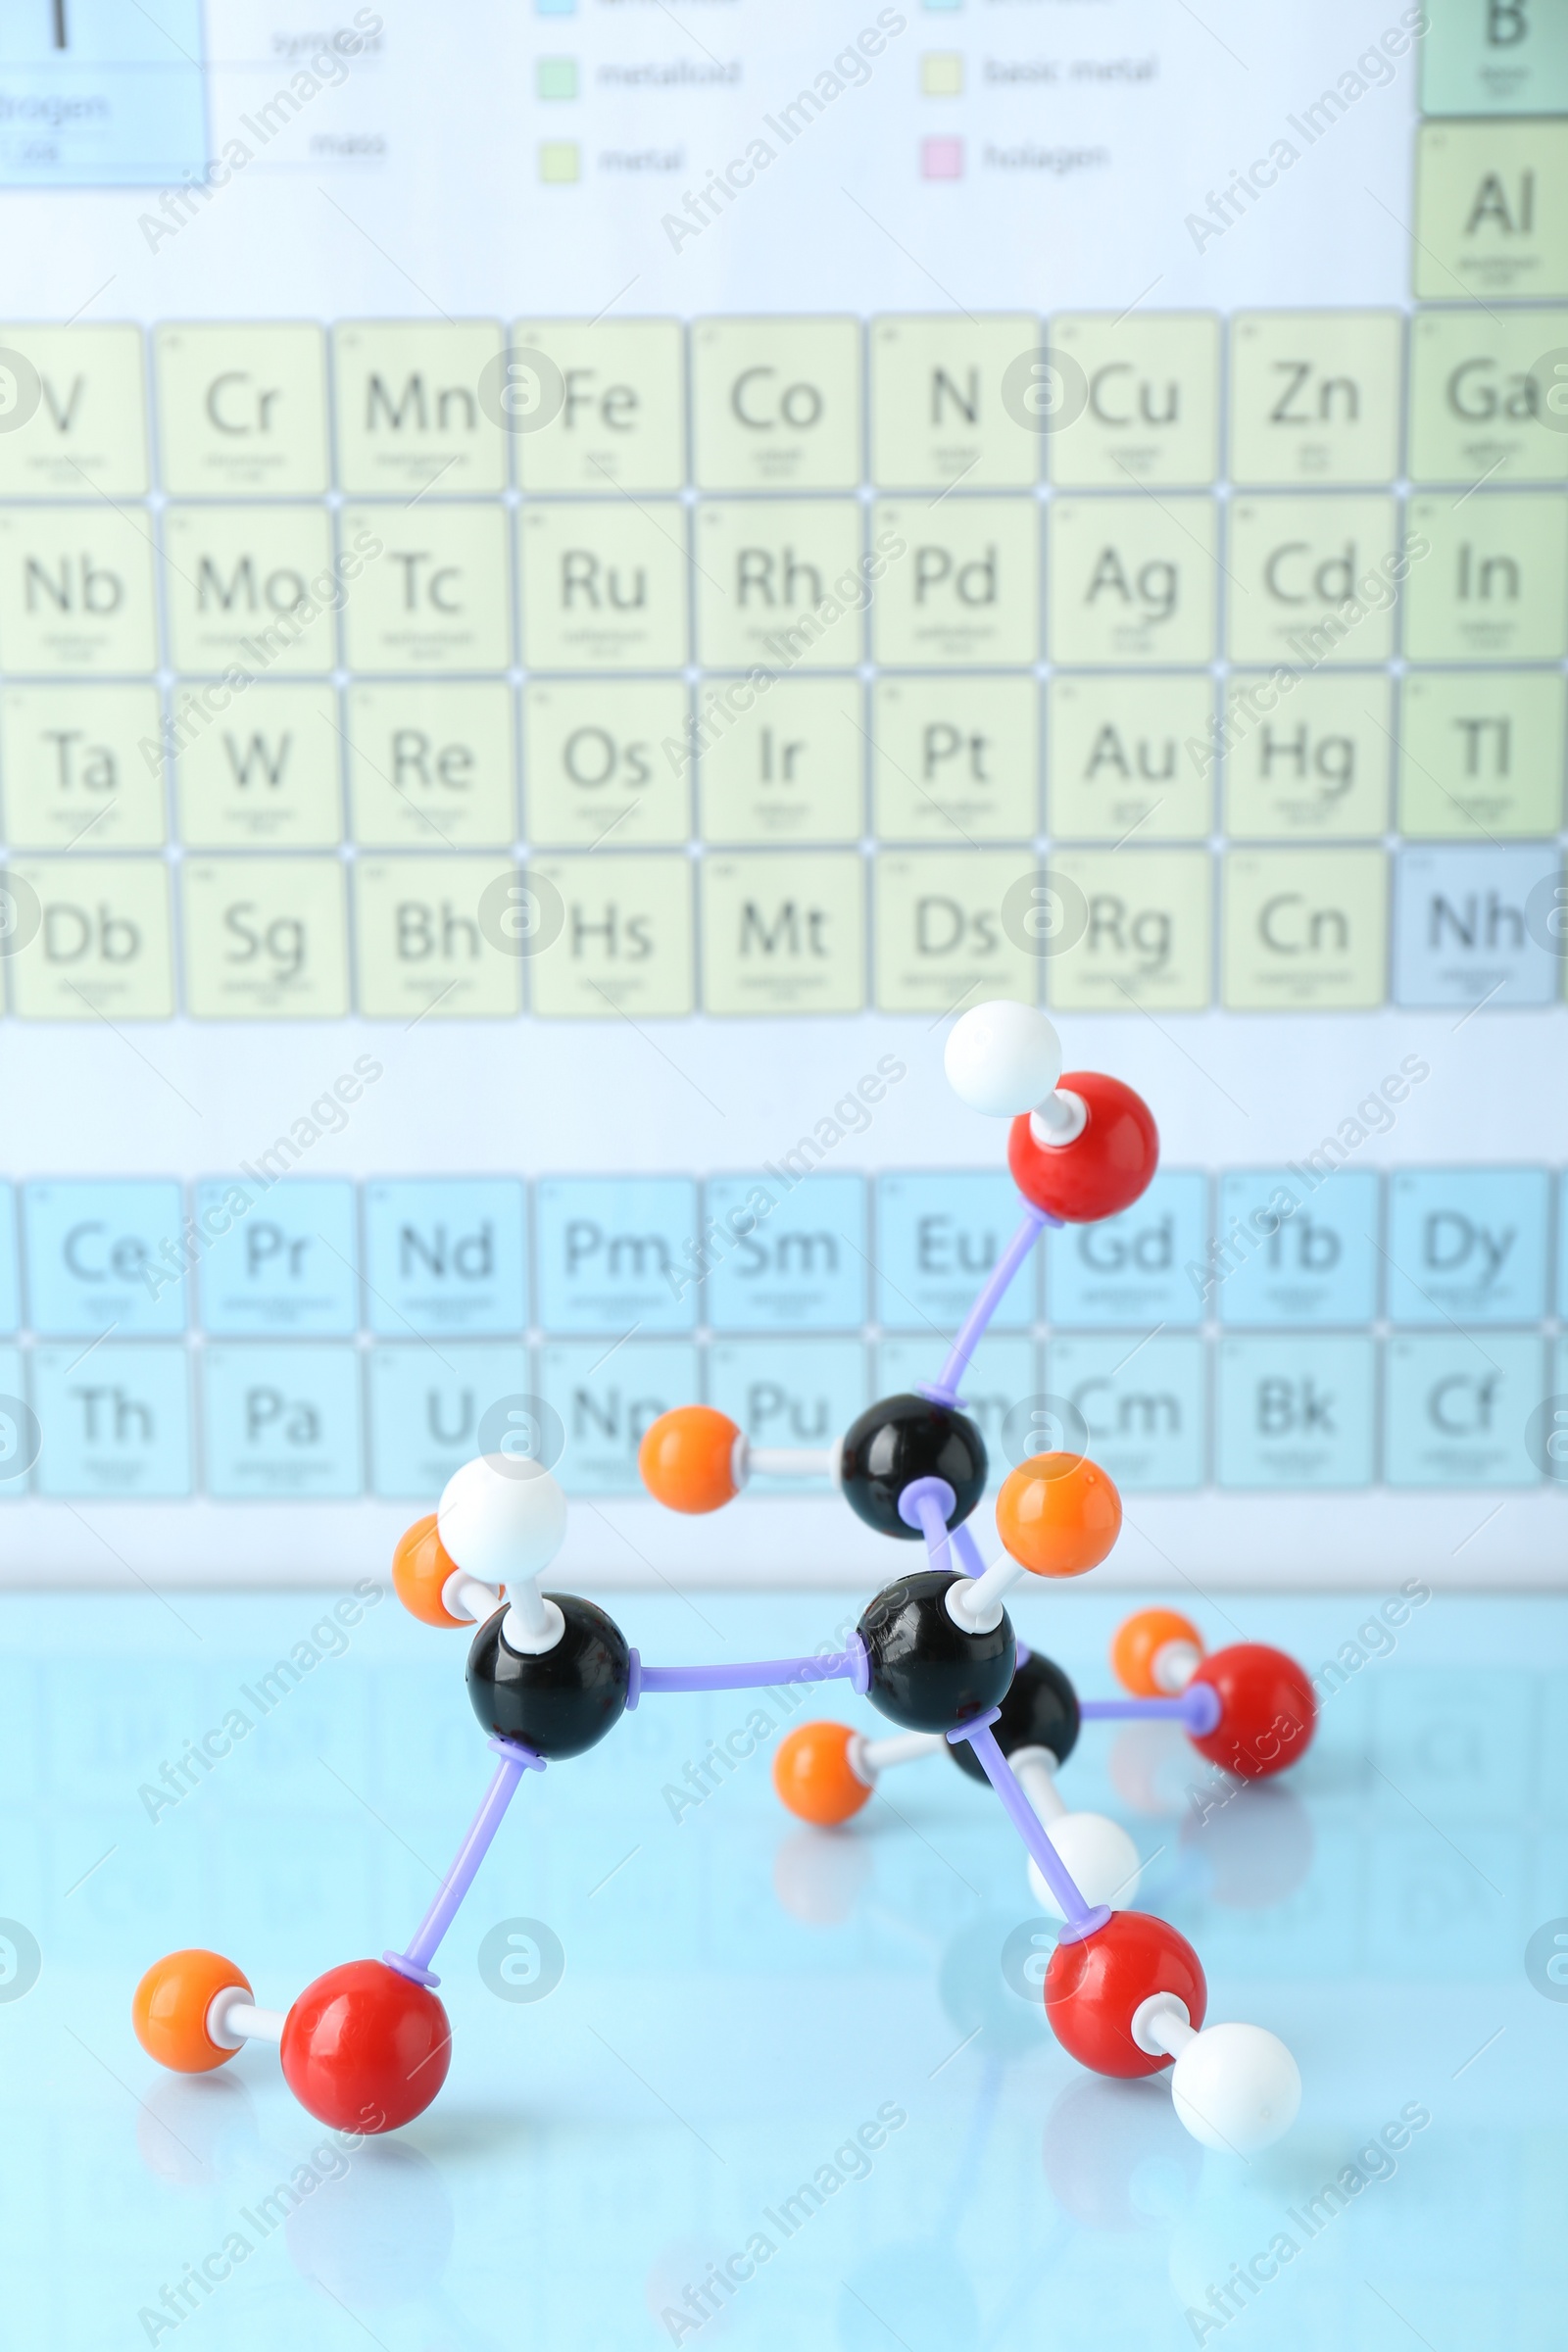 Photo of Molecular model on light surface against periodic table